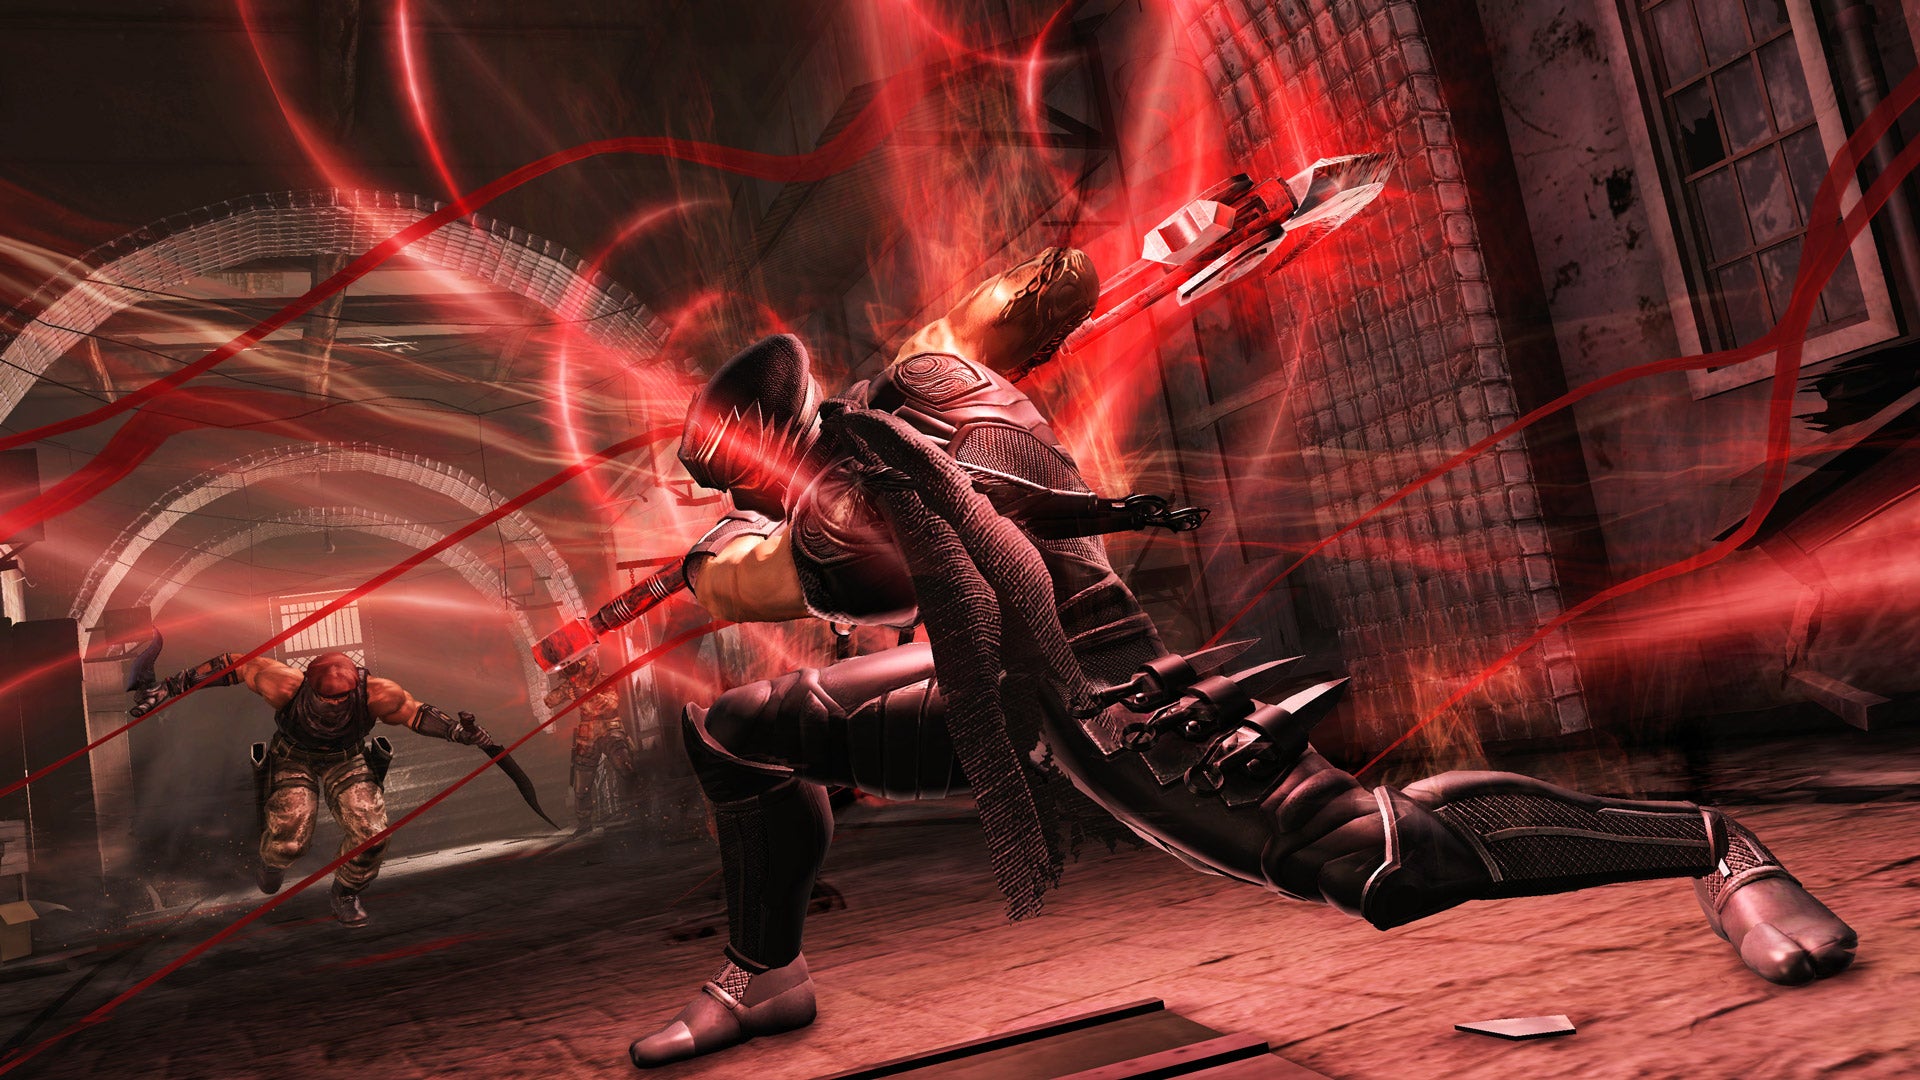 Image for Ninja Gaiden PC ports get basic resolution and graphic options one month after release